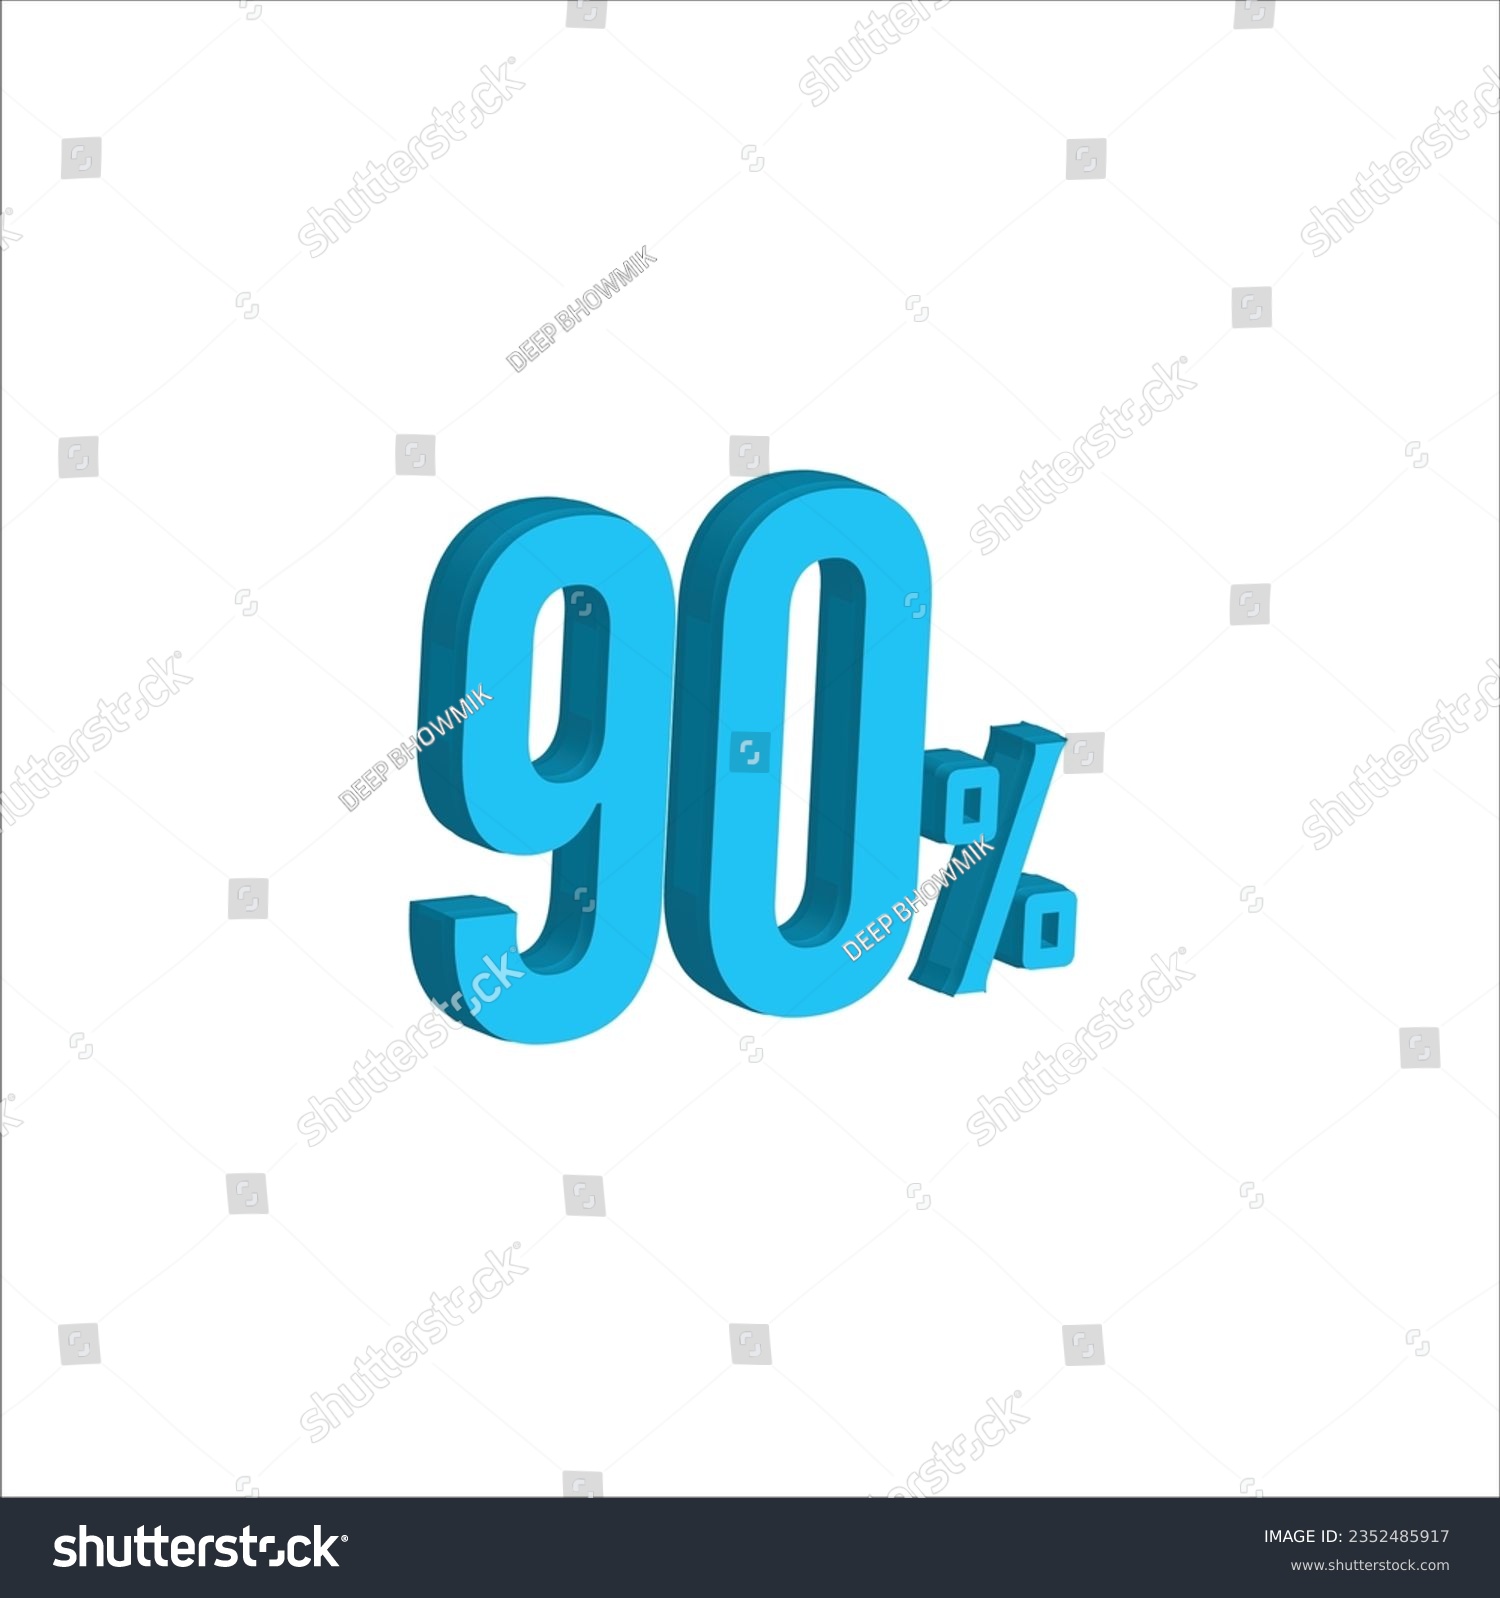 SVG of Sky blue 90% Percent 3d illustration sign on white background have work path. Special Offer 97 Percent Discount Tag. Advertising signs. Product design. Product sales.
 svg